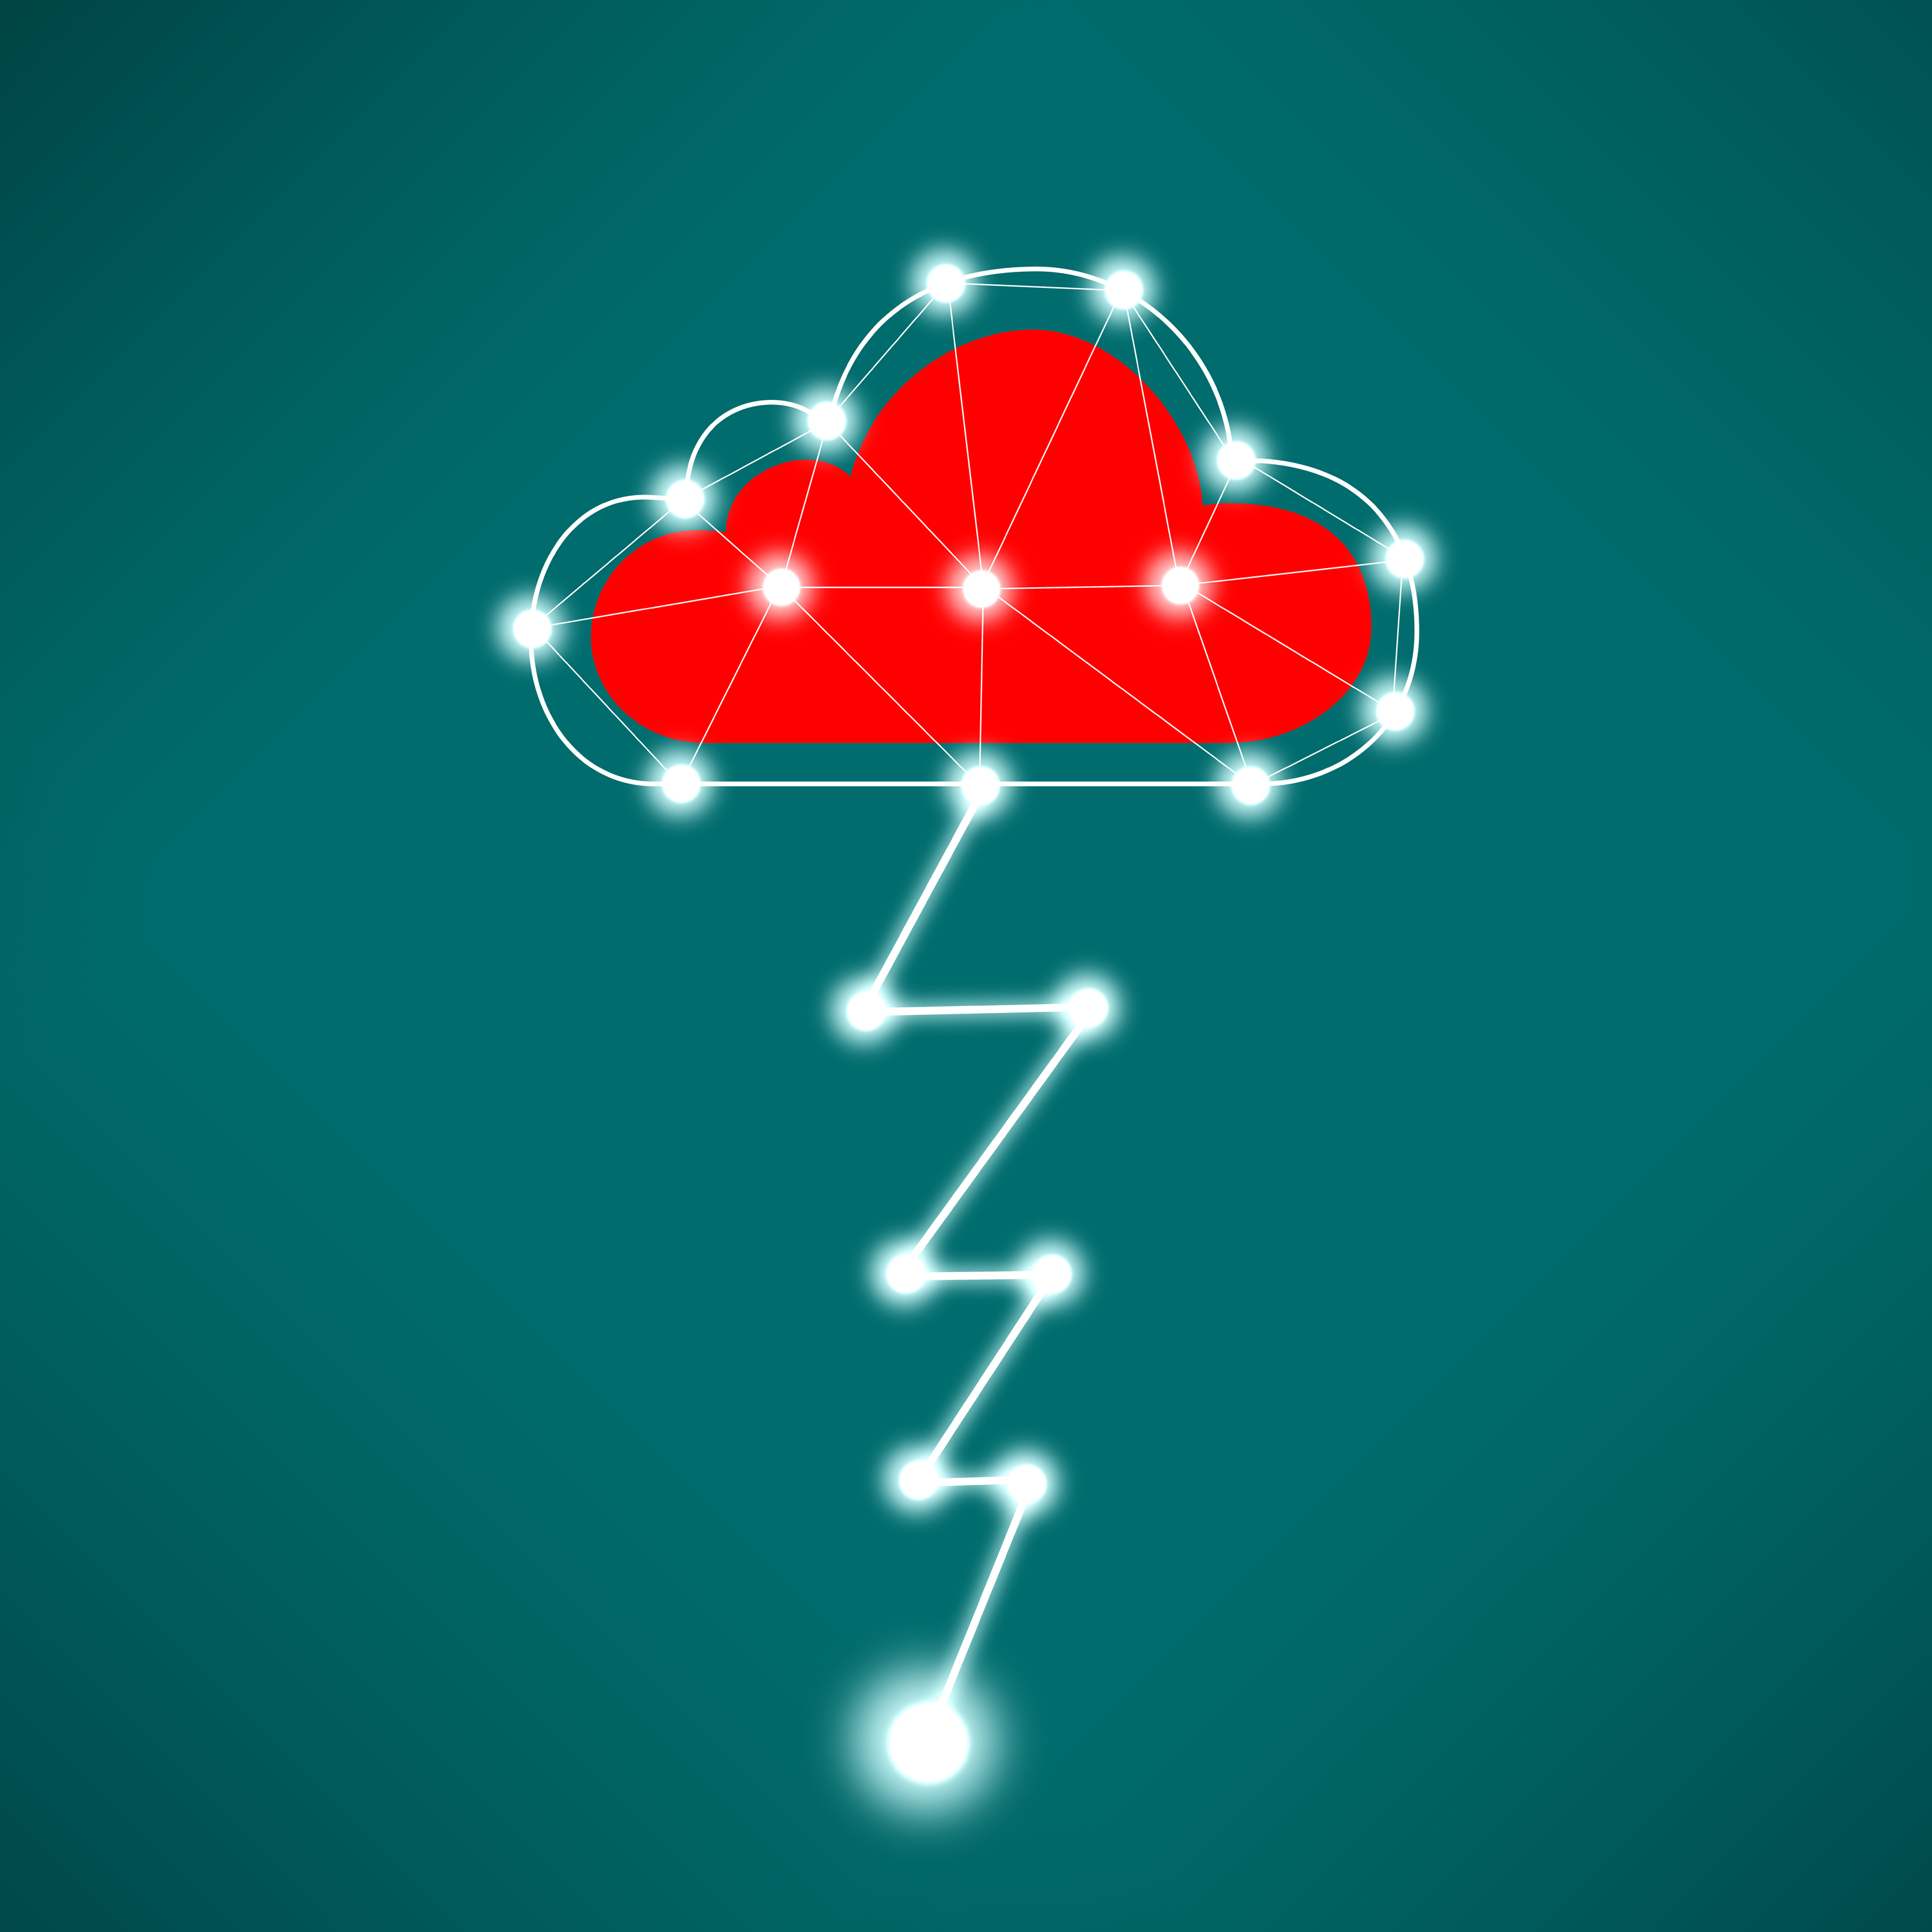 Digital Cloud Concept with Lightning, Abstract, Online, Season, Screen, HQ Photo